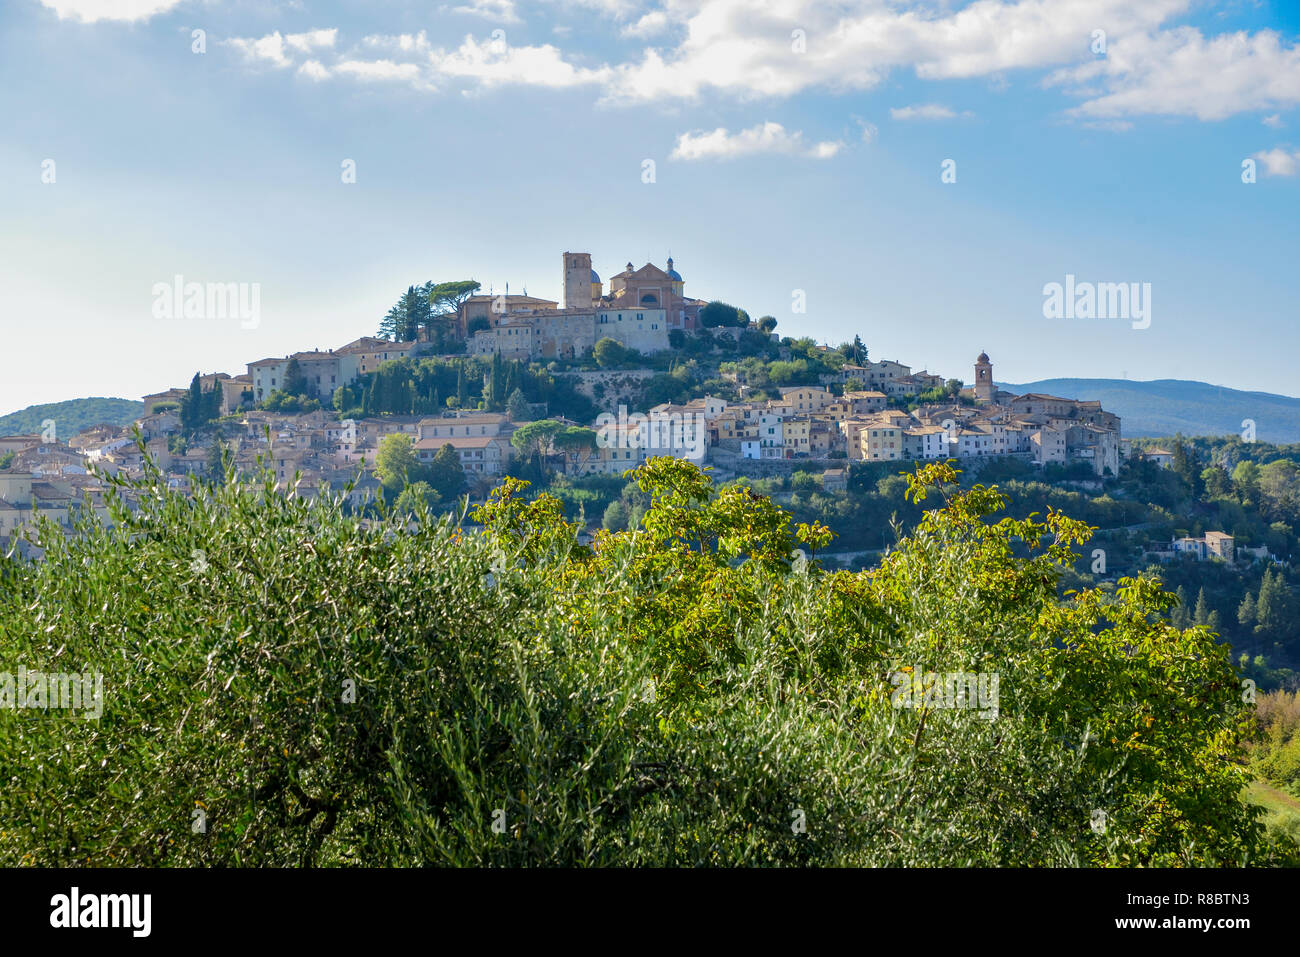 Amelia umbria italy hi-res stock photography and images - Alamy